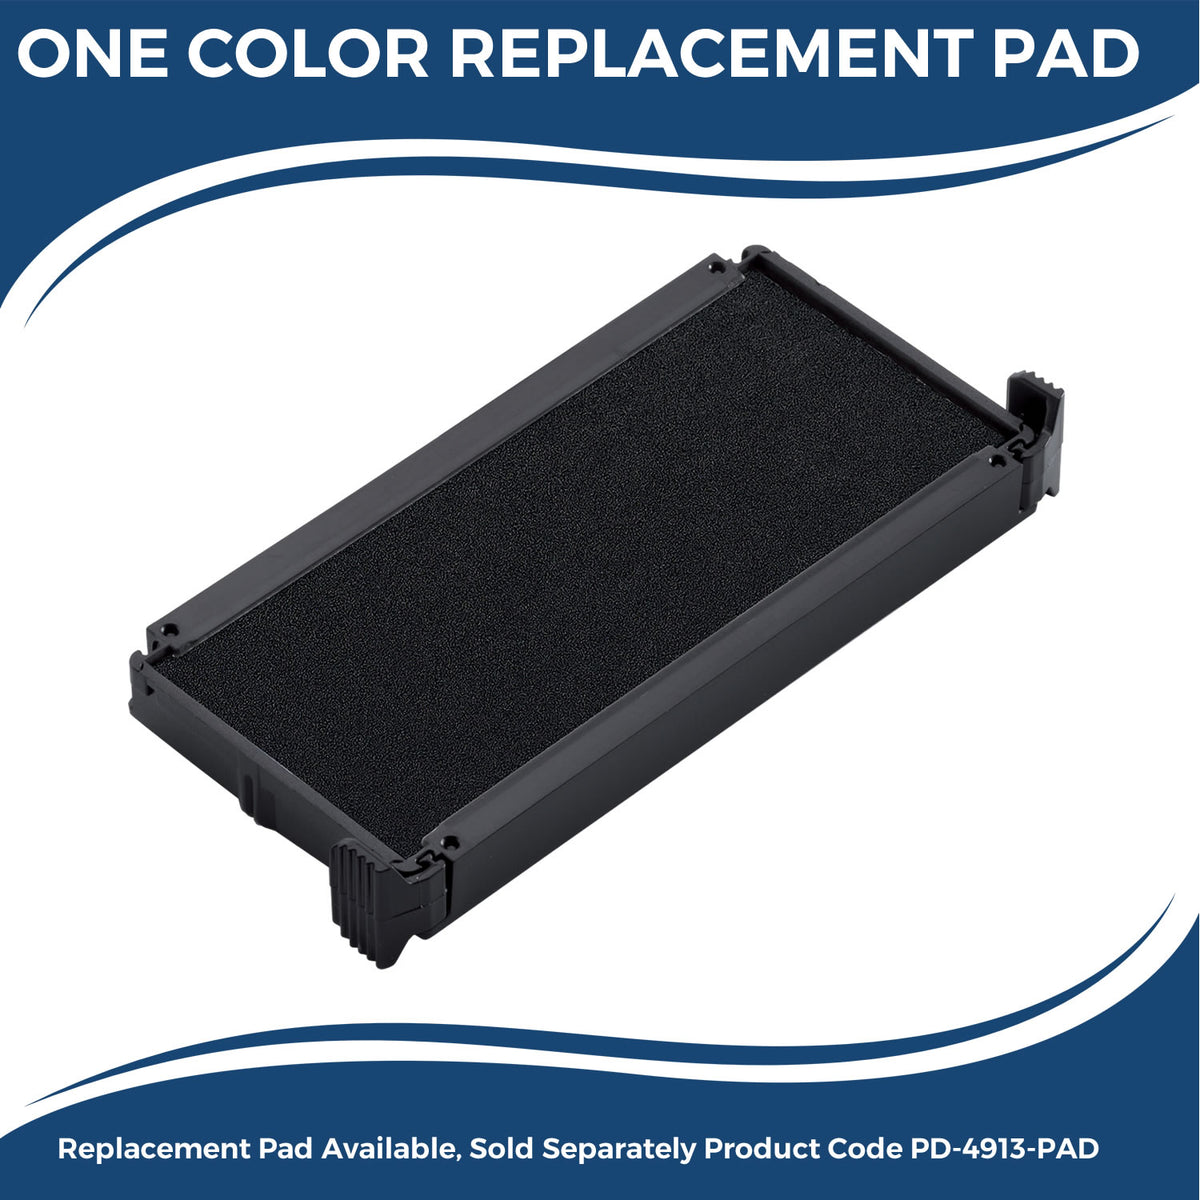 Large Self-Inking Received with Box Stamp 5650S Large Replacment Pad